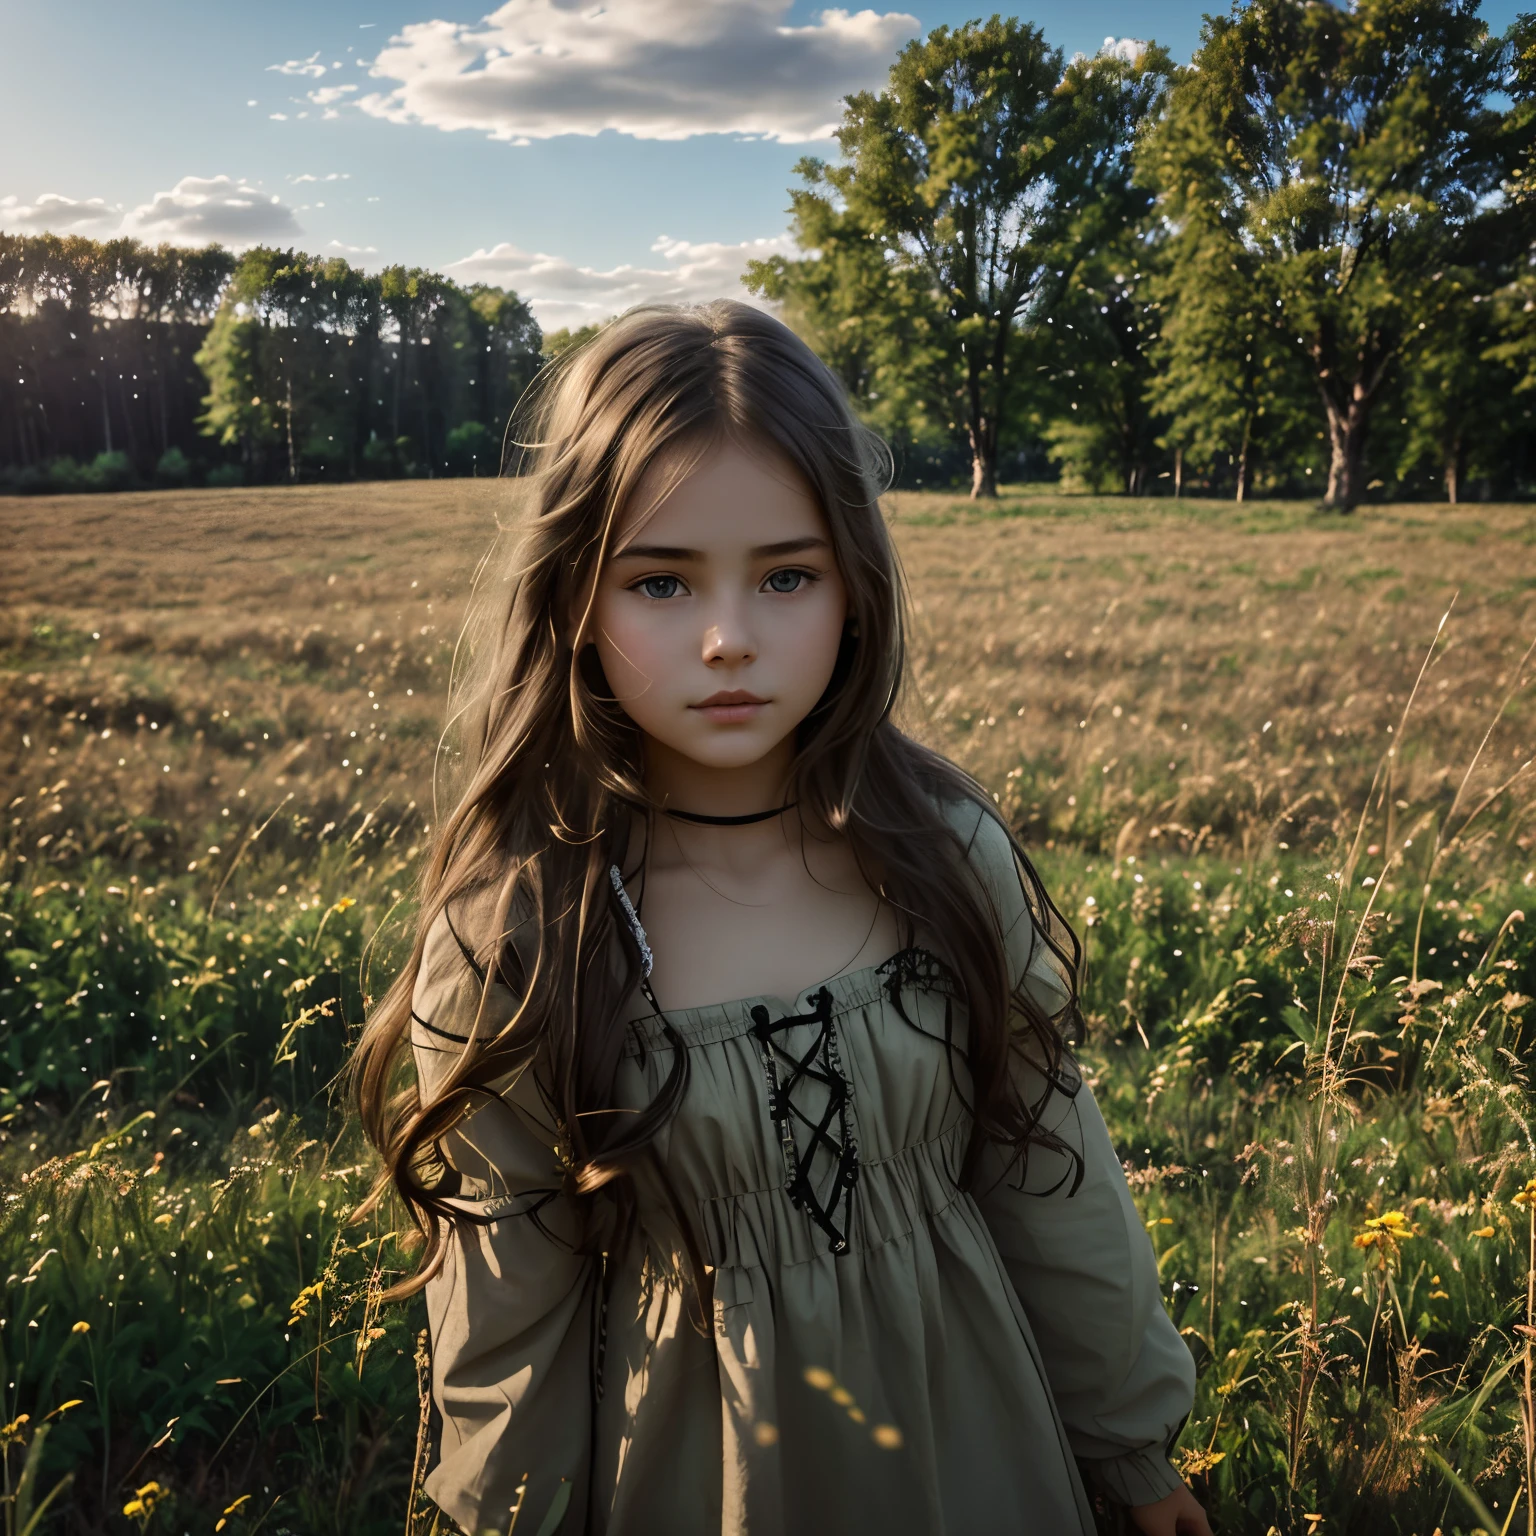 arafed girl in a field with a field of grass and trees, in a field, alexey egorov, in a meadow, by irakli nadar, young girl, gorgeous young model, color photograph portrait 4k, 🍁 cute, beautiful young girl, 🤤 girl portrait, a stunning young ethereal figure, young goddess, European girl, down syndrome,